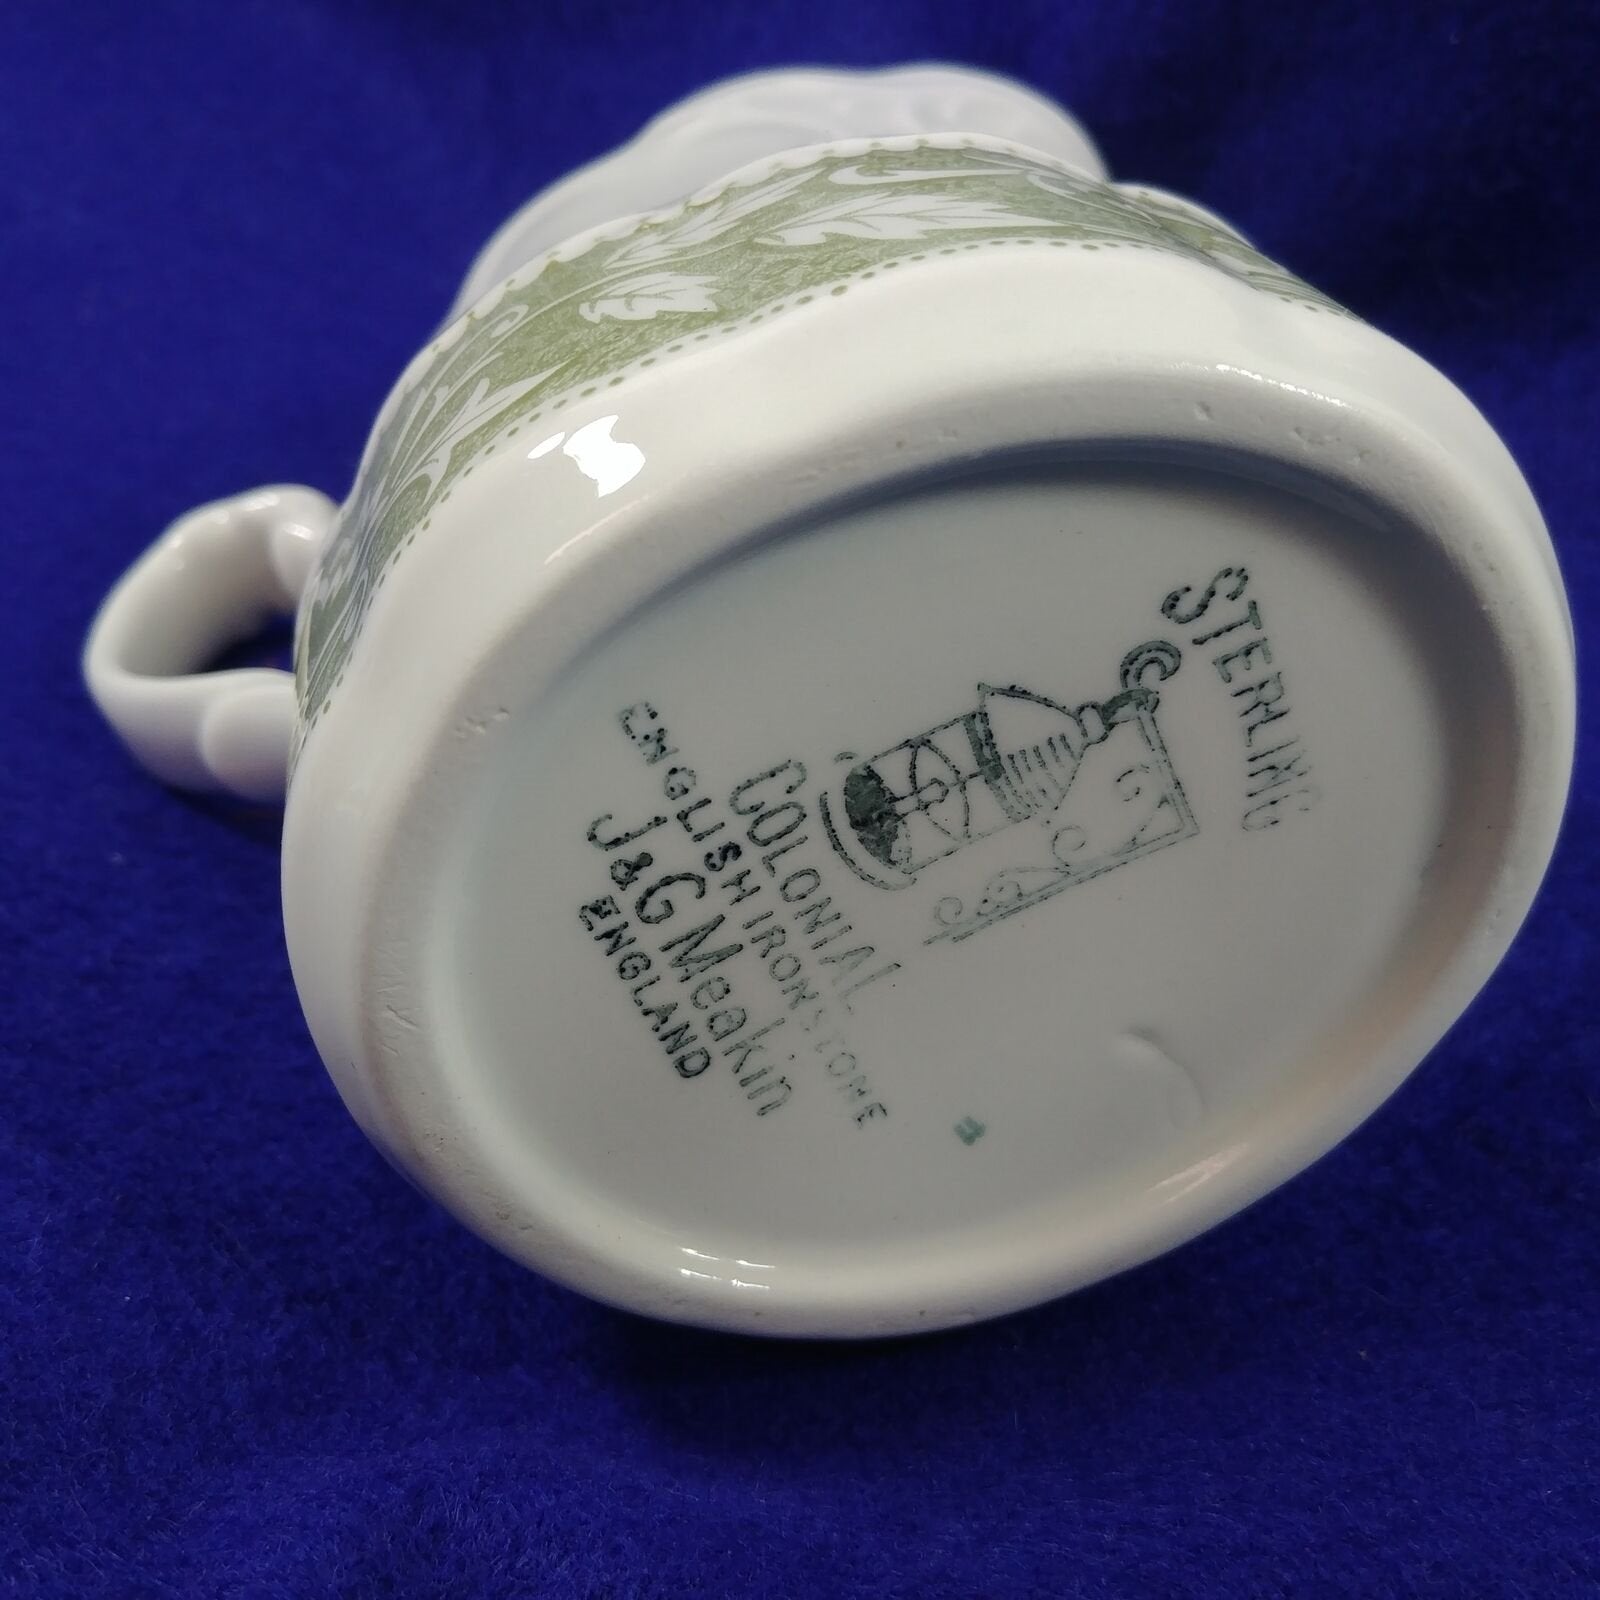 J&G Meakin Sterling Colonial Creamer Pitcher English Ironstone